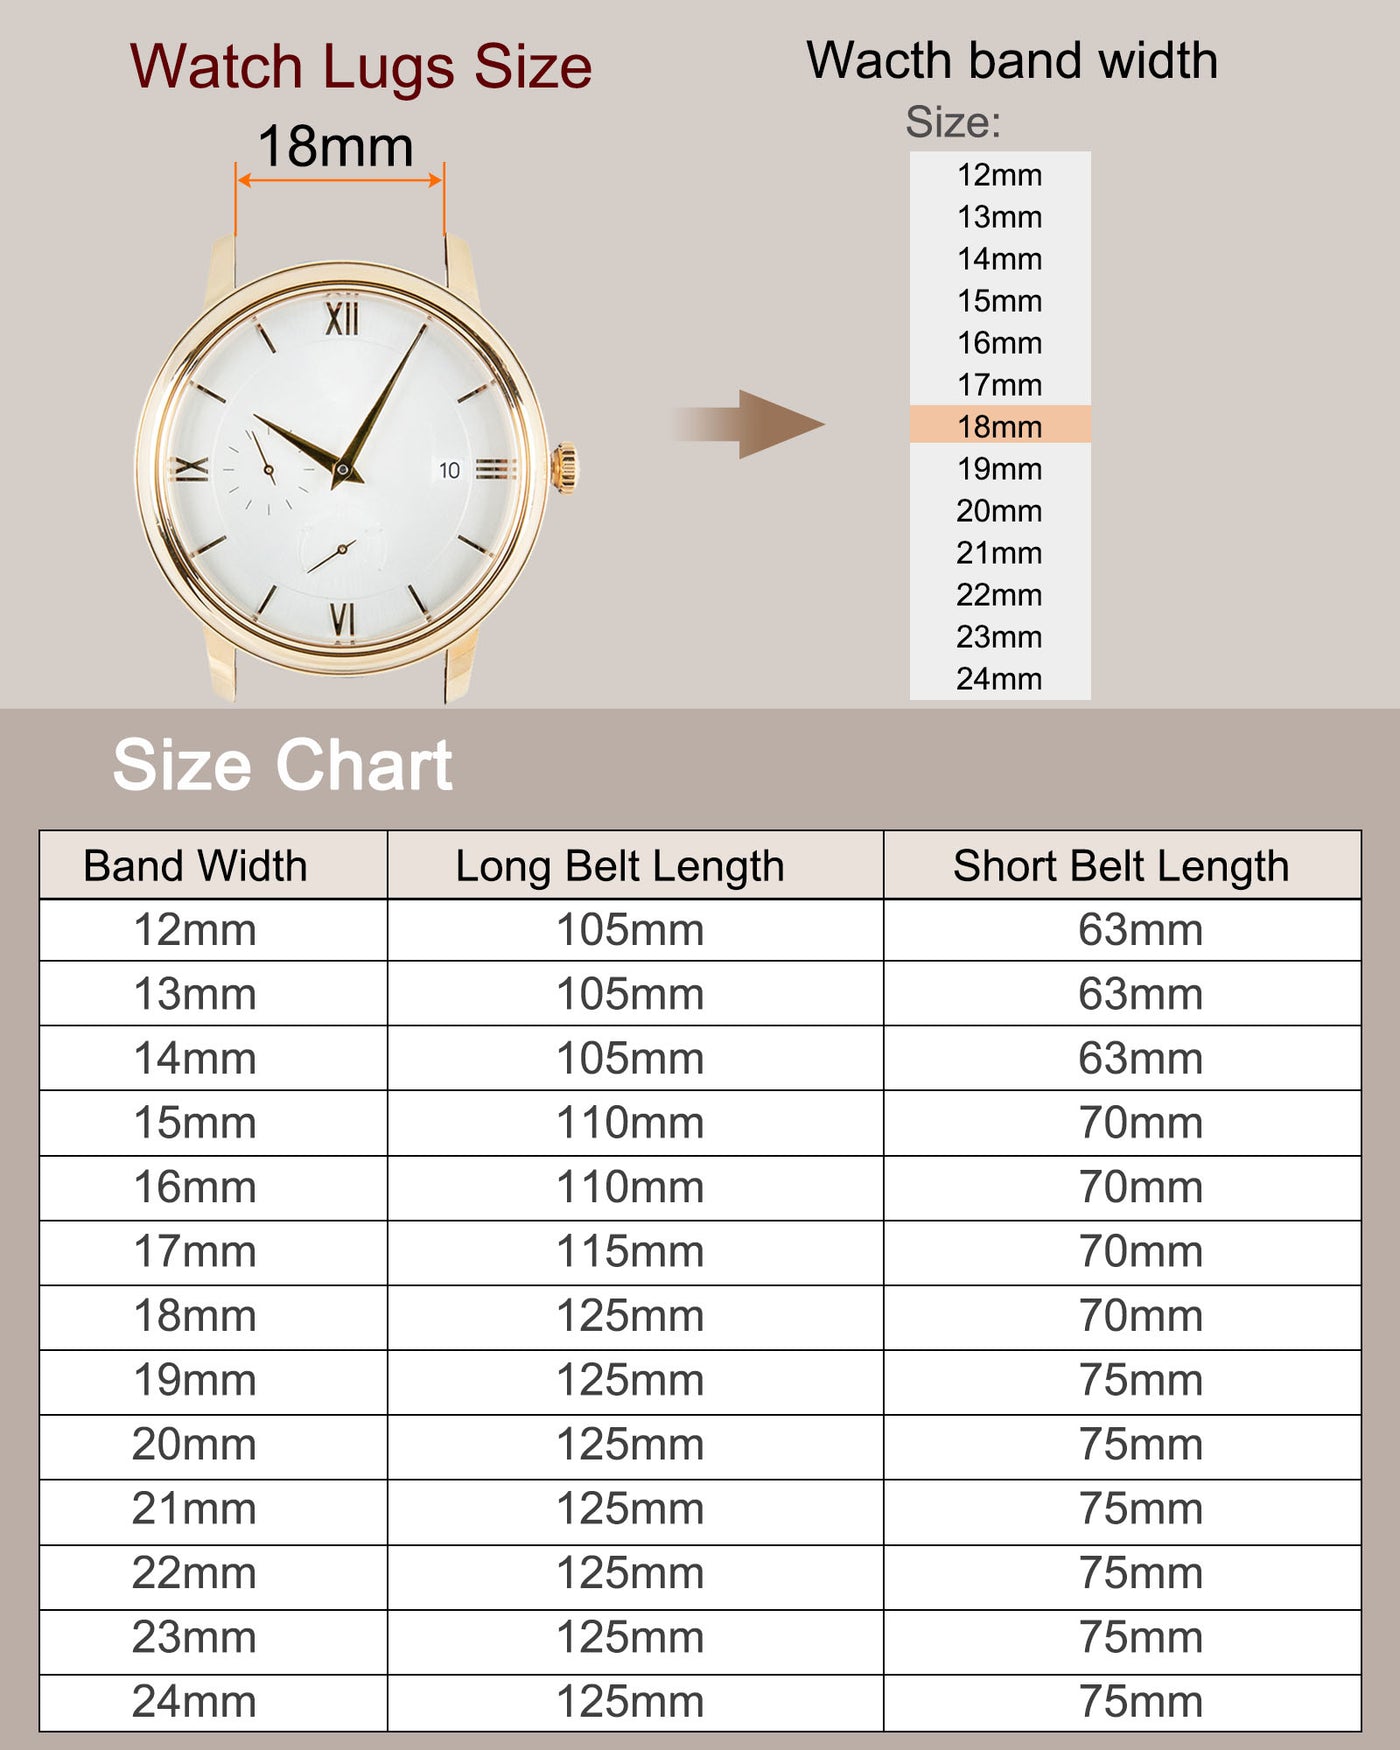 uxcell Uxcell Leather Band Deployment Buckle Watch Strap 21mm Leather Strap, Light Brown